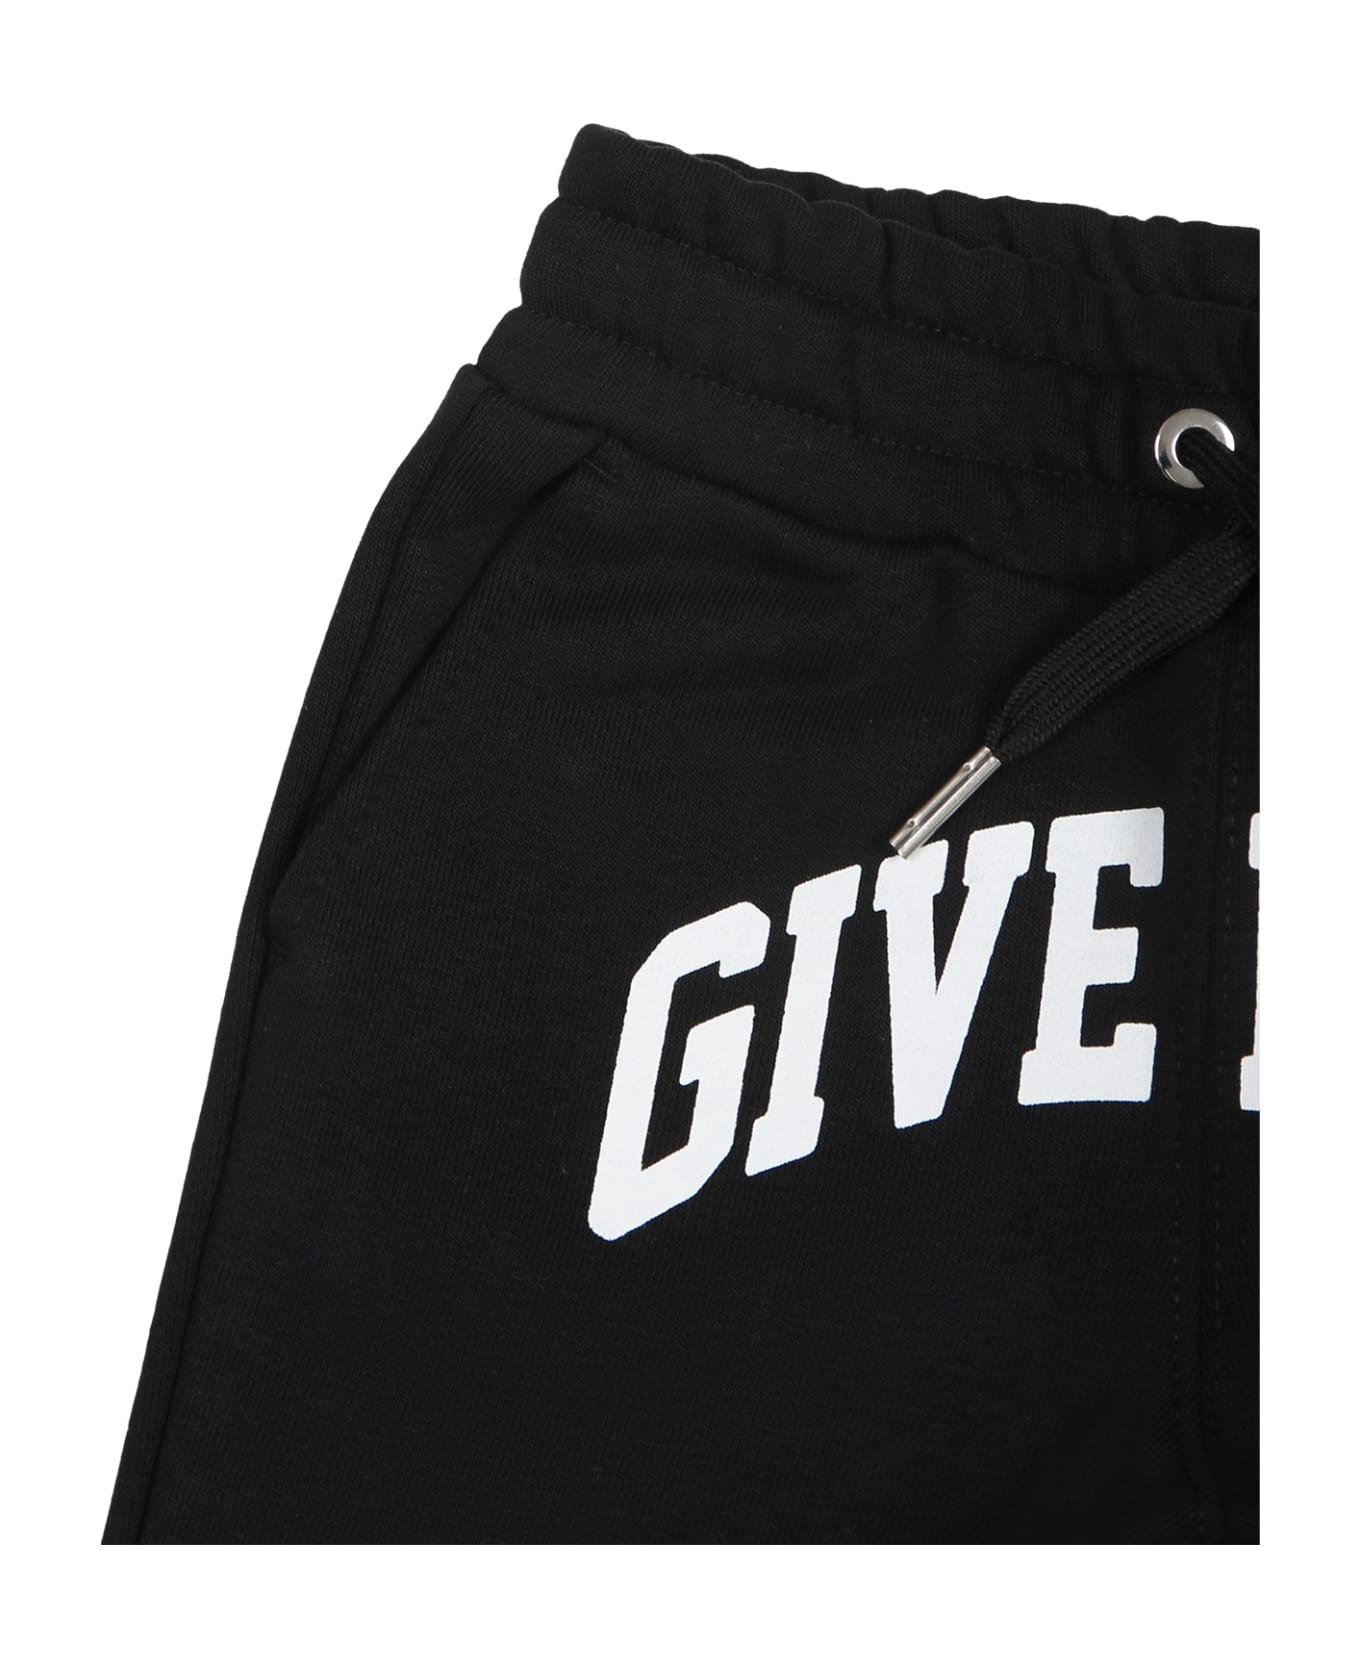 Givenchy Black Tracksuit Trousers Fpr Baby Boy With Logo - Black ボトムス